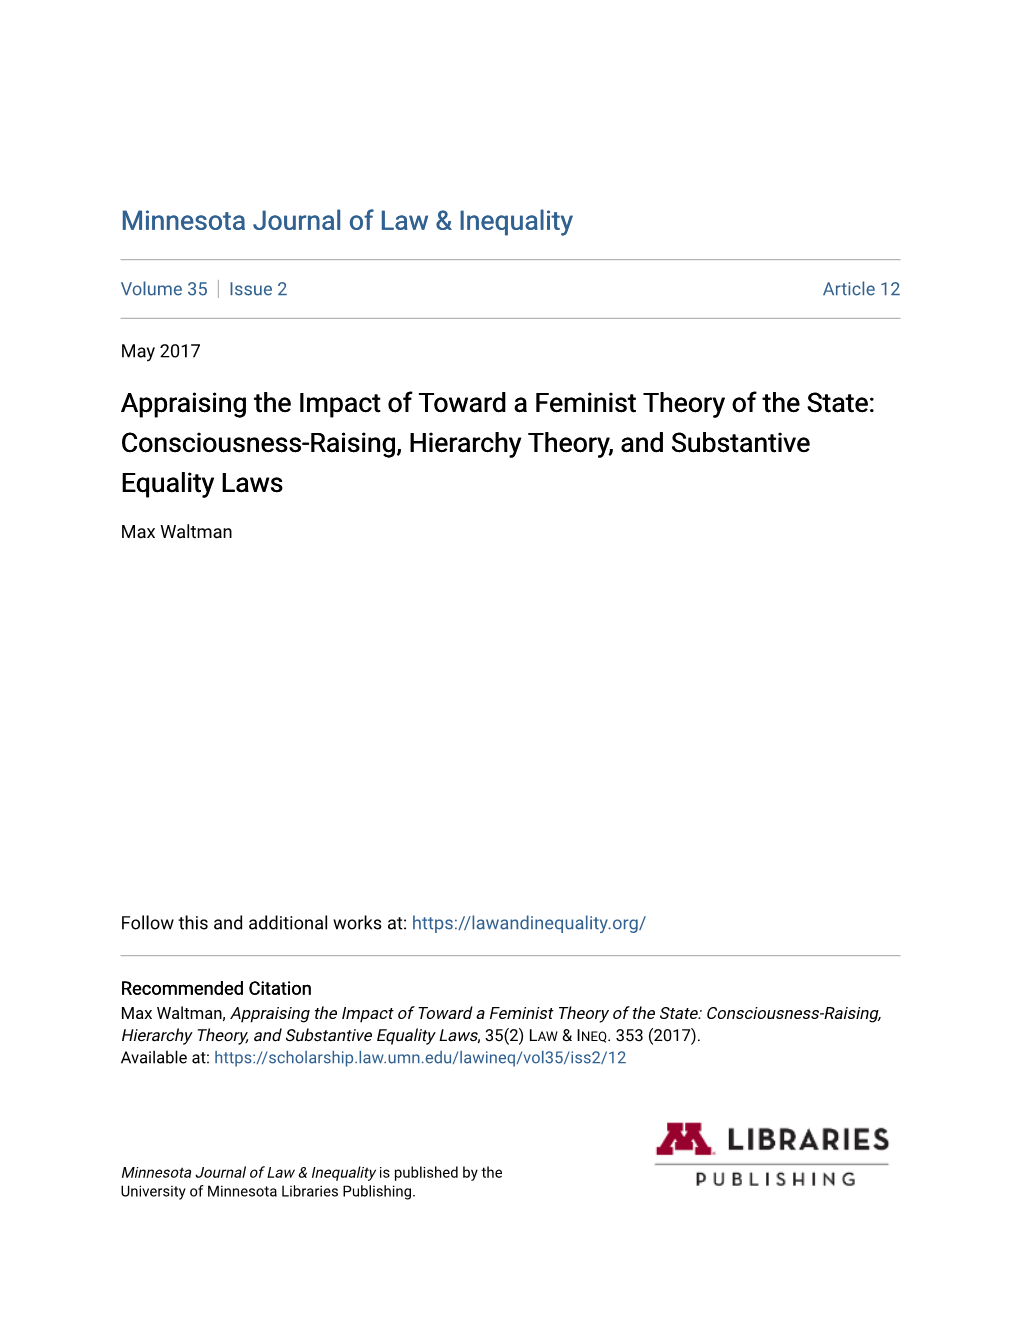 Appraising the Impact of Toward a Feminist Theory of the State: Consciousness-Raising, Hierarchy Theory, and Substantive Equality Laws